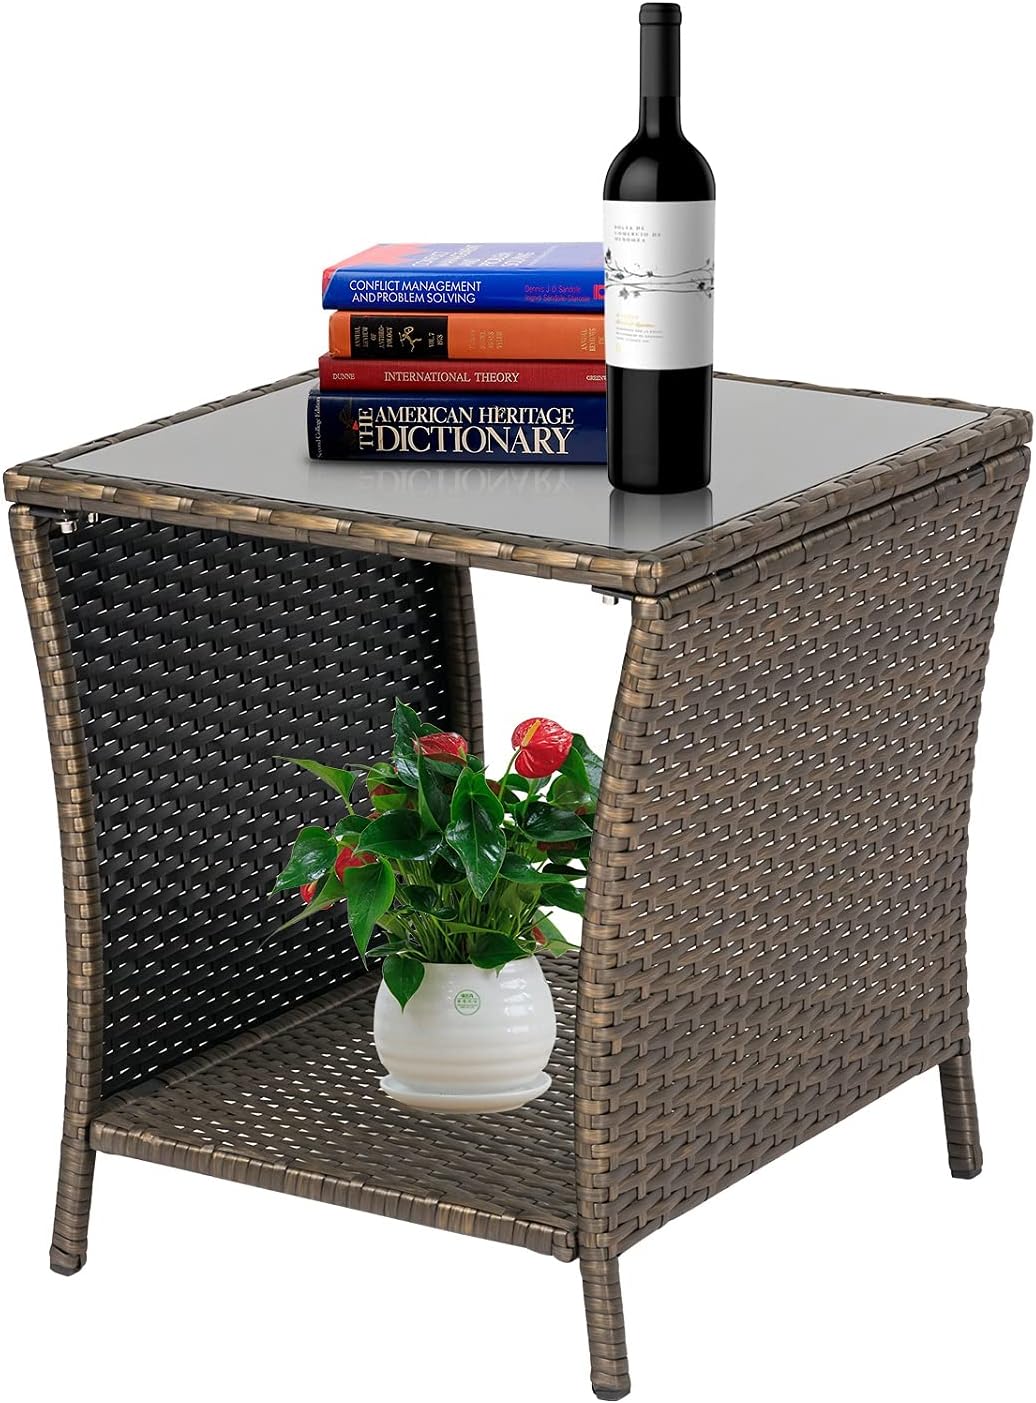 Kinbor Patio Wicker Rattan Side Table Outdoor Square Tempered Glass Top with Storage, Brown - image 2 of 8